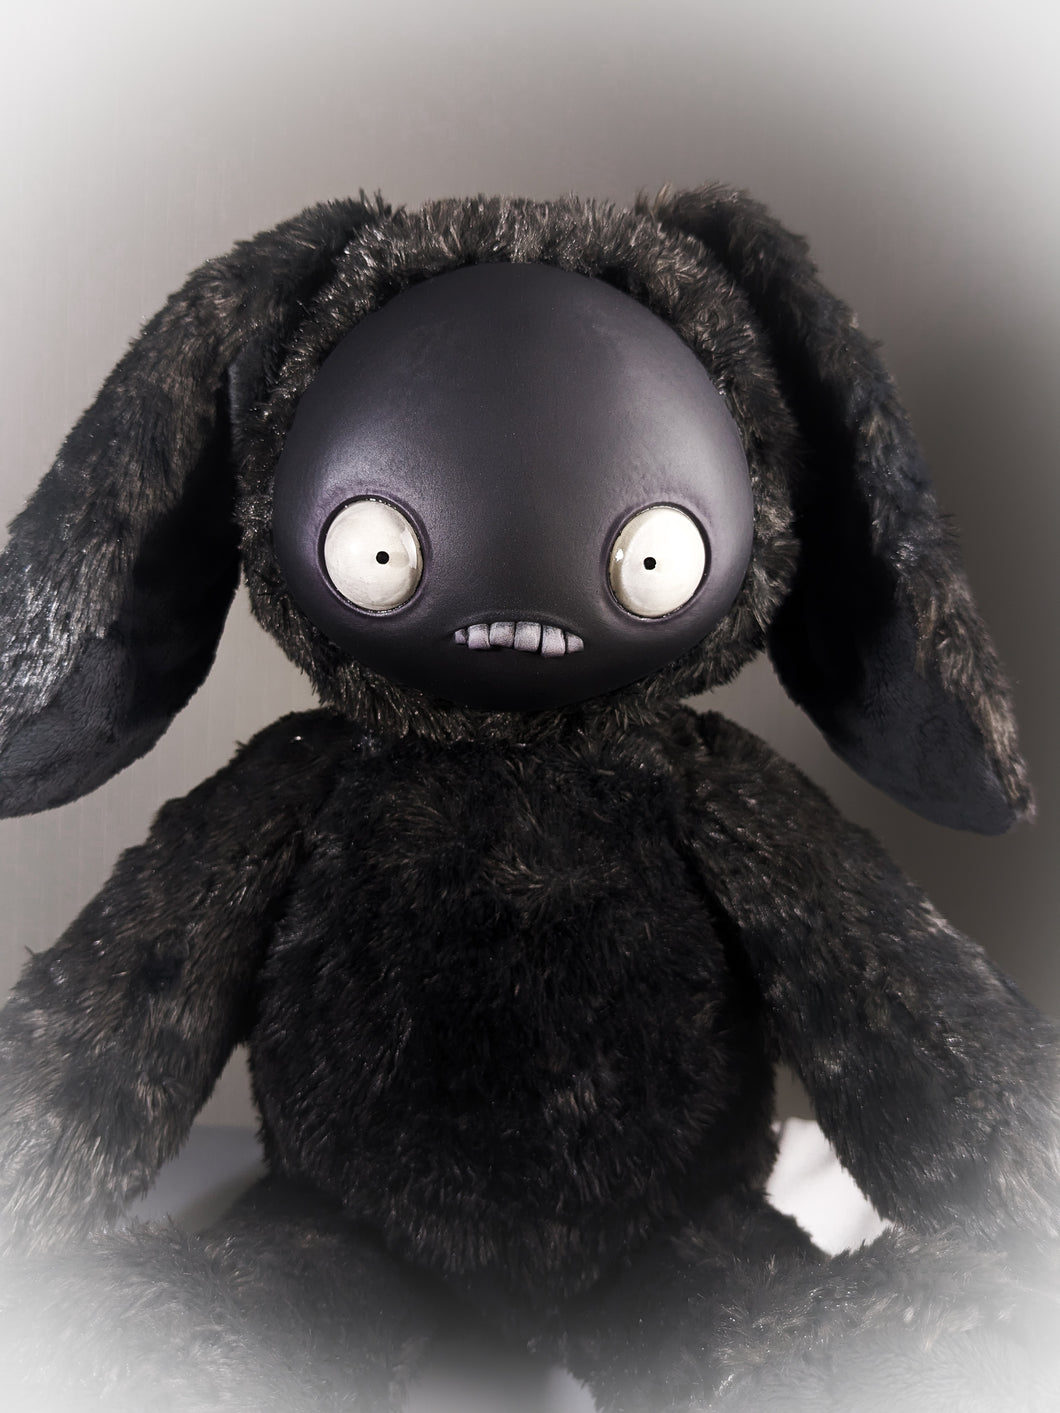 Jitters (Dark Bunny Ver.) - CRYPTCRITS Monster Art Doll Plush Toy